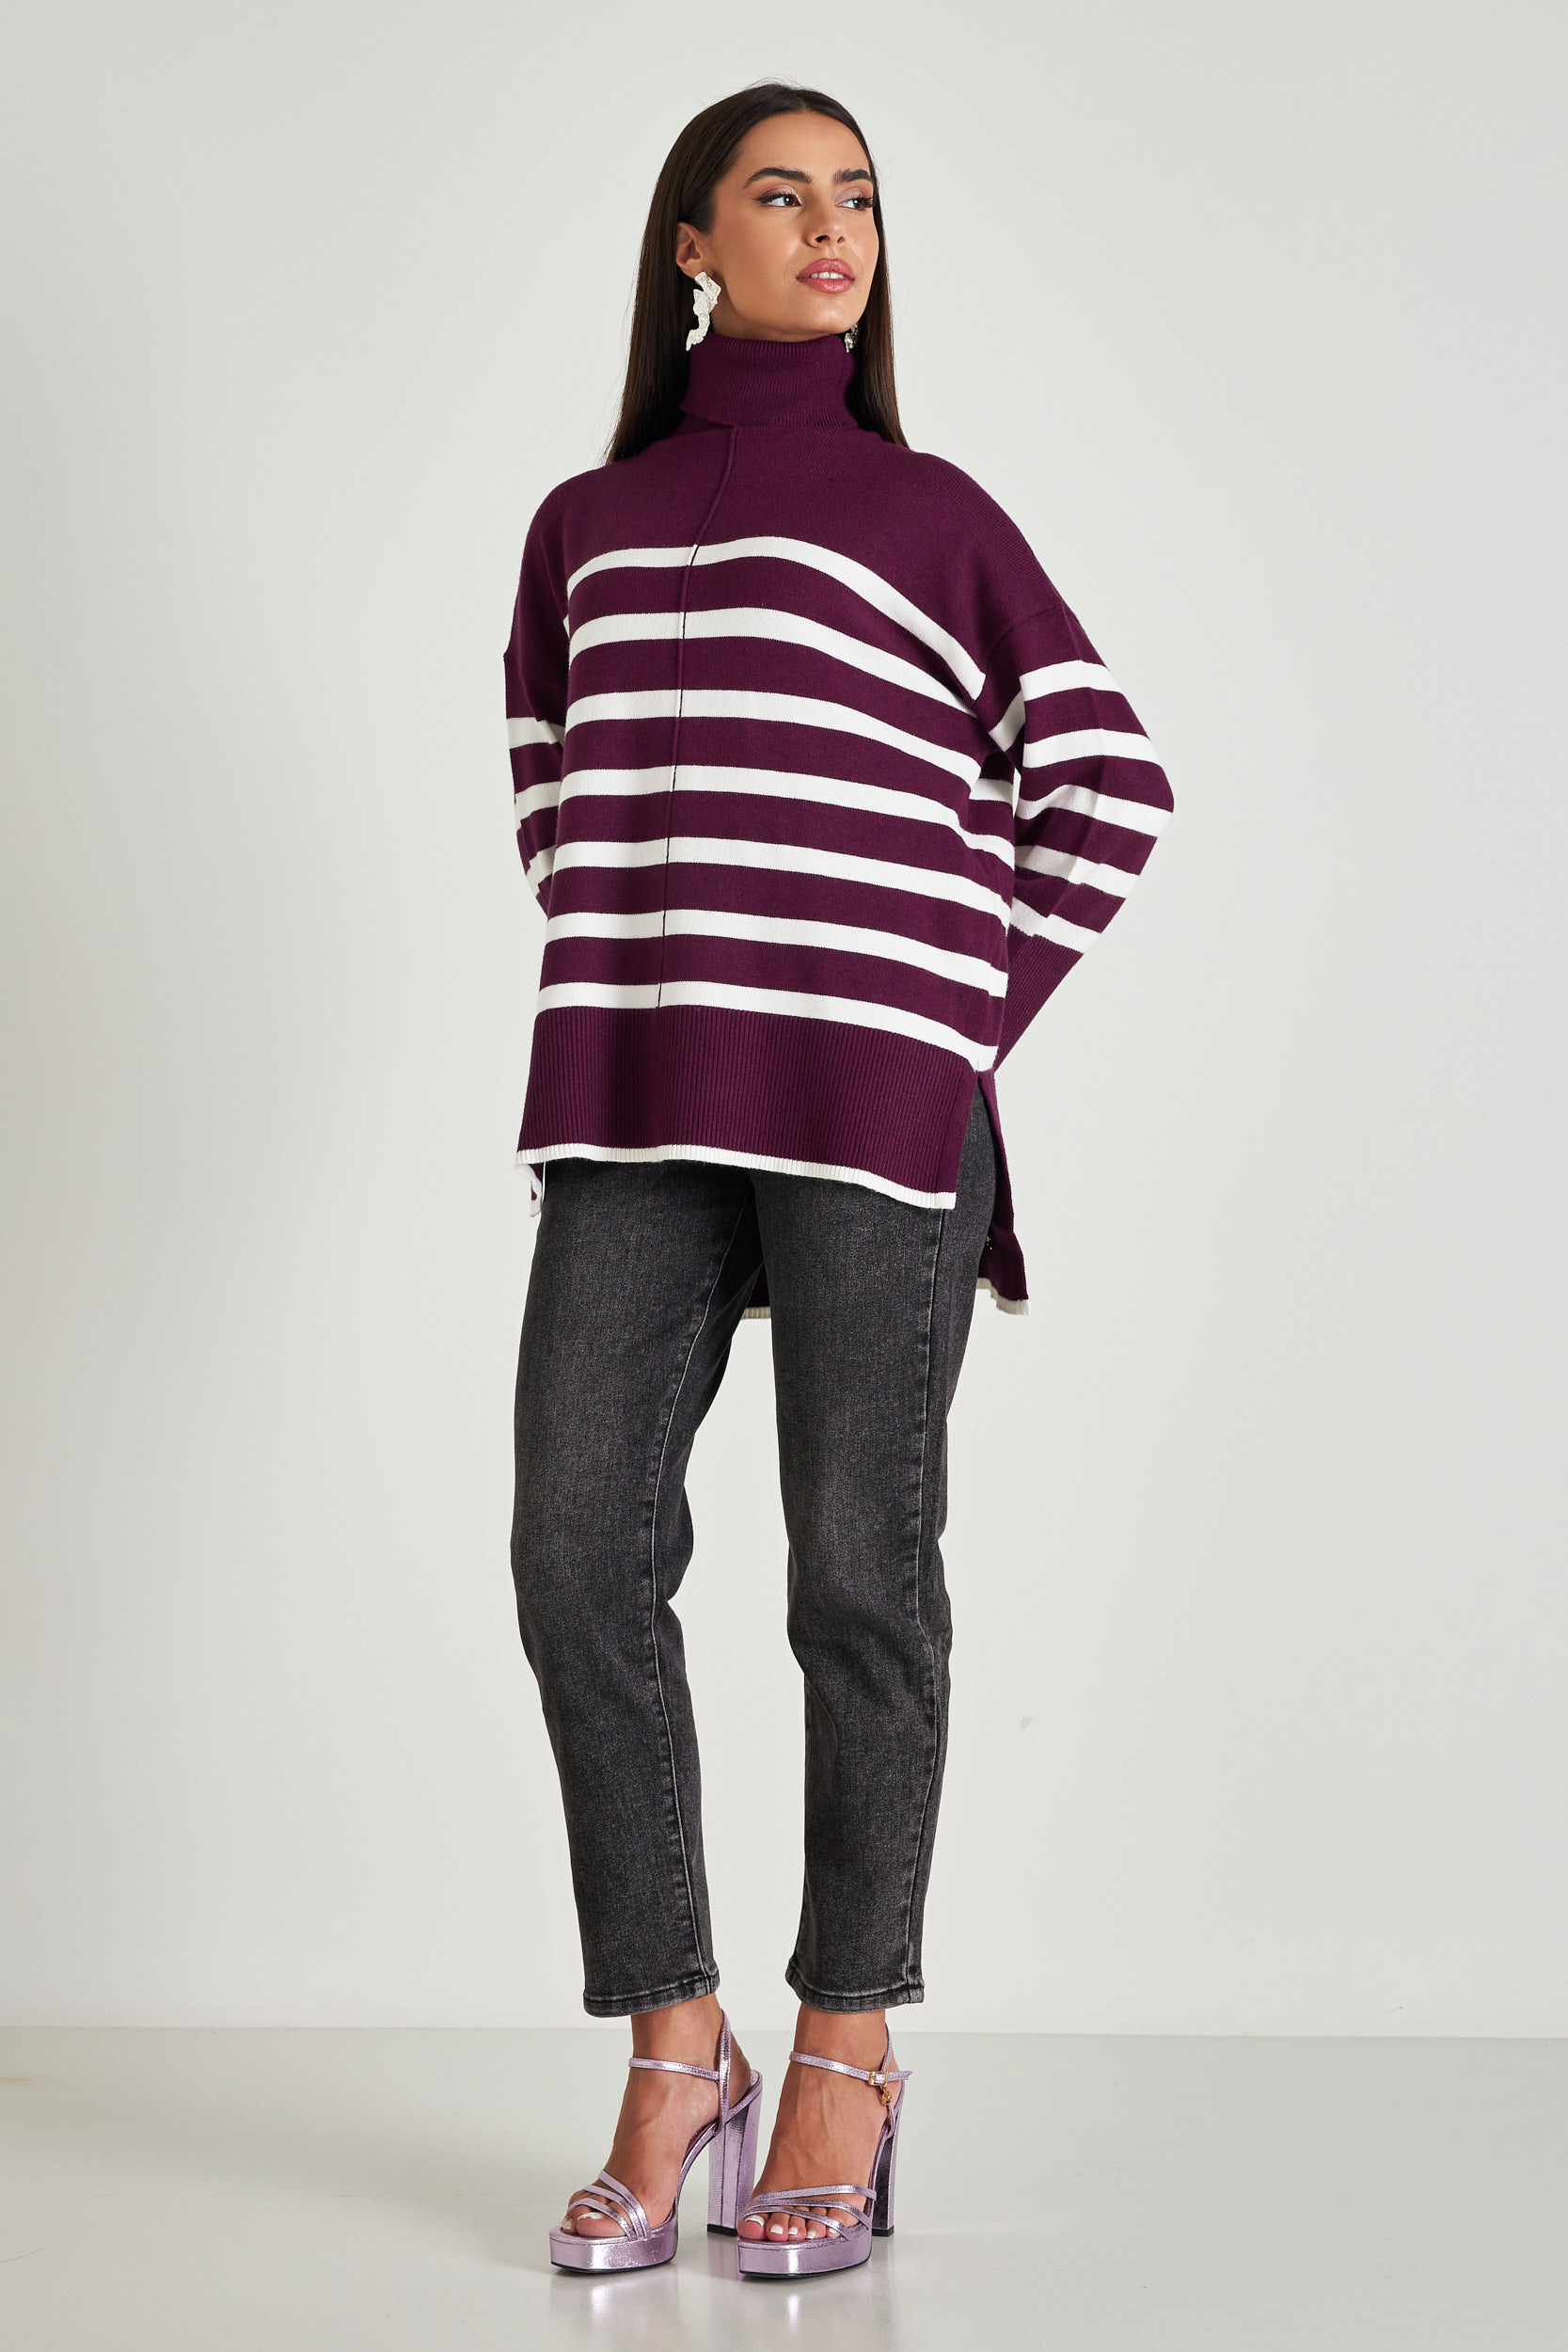 Picture of High neck stripped sweater